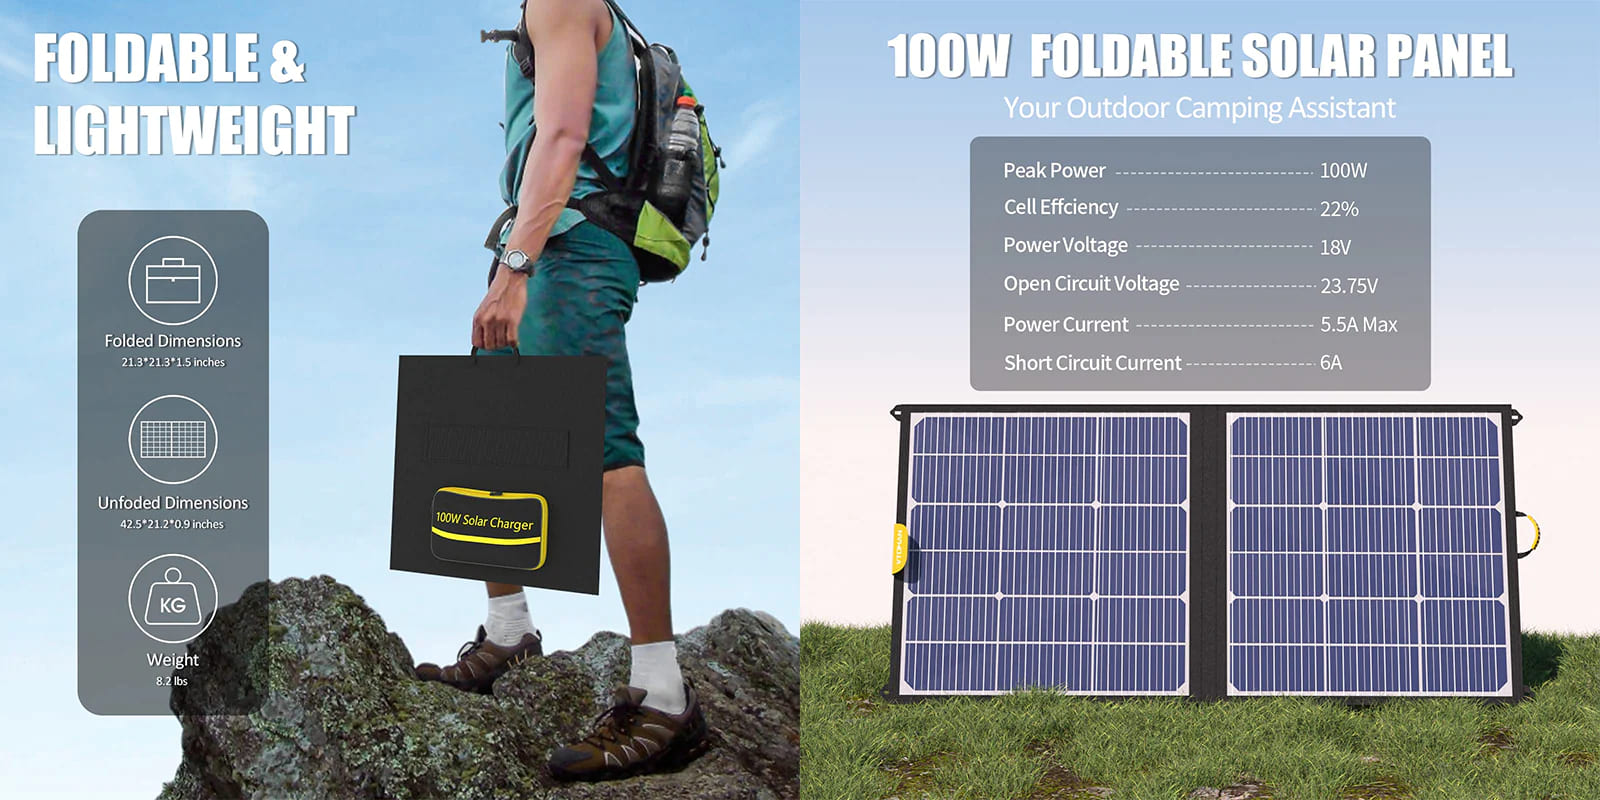  VTOMAN Portable Solar Panel 100W, 18V Foldable Solar Charger  with DC5521 & USB-A & Type-C Connectors for Camping RV/Van, IPX4  Waterproof, Compatible with Power Stations, Power Banks, Cellphones, etc 